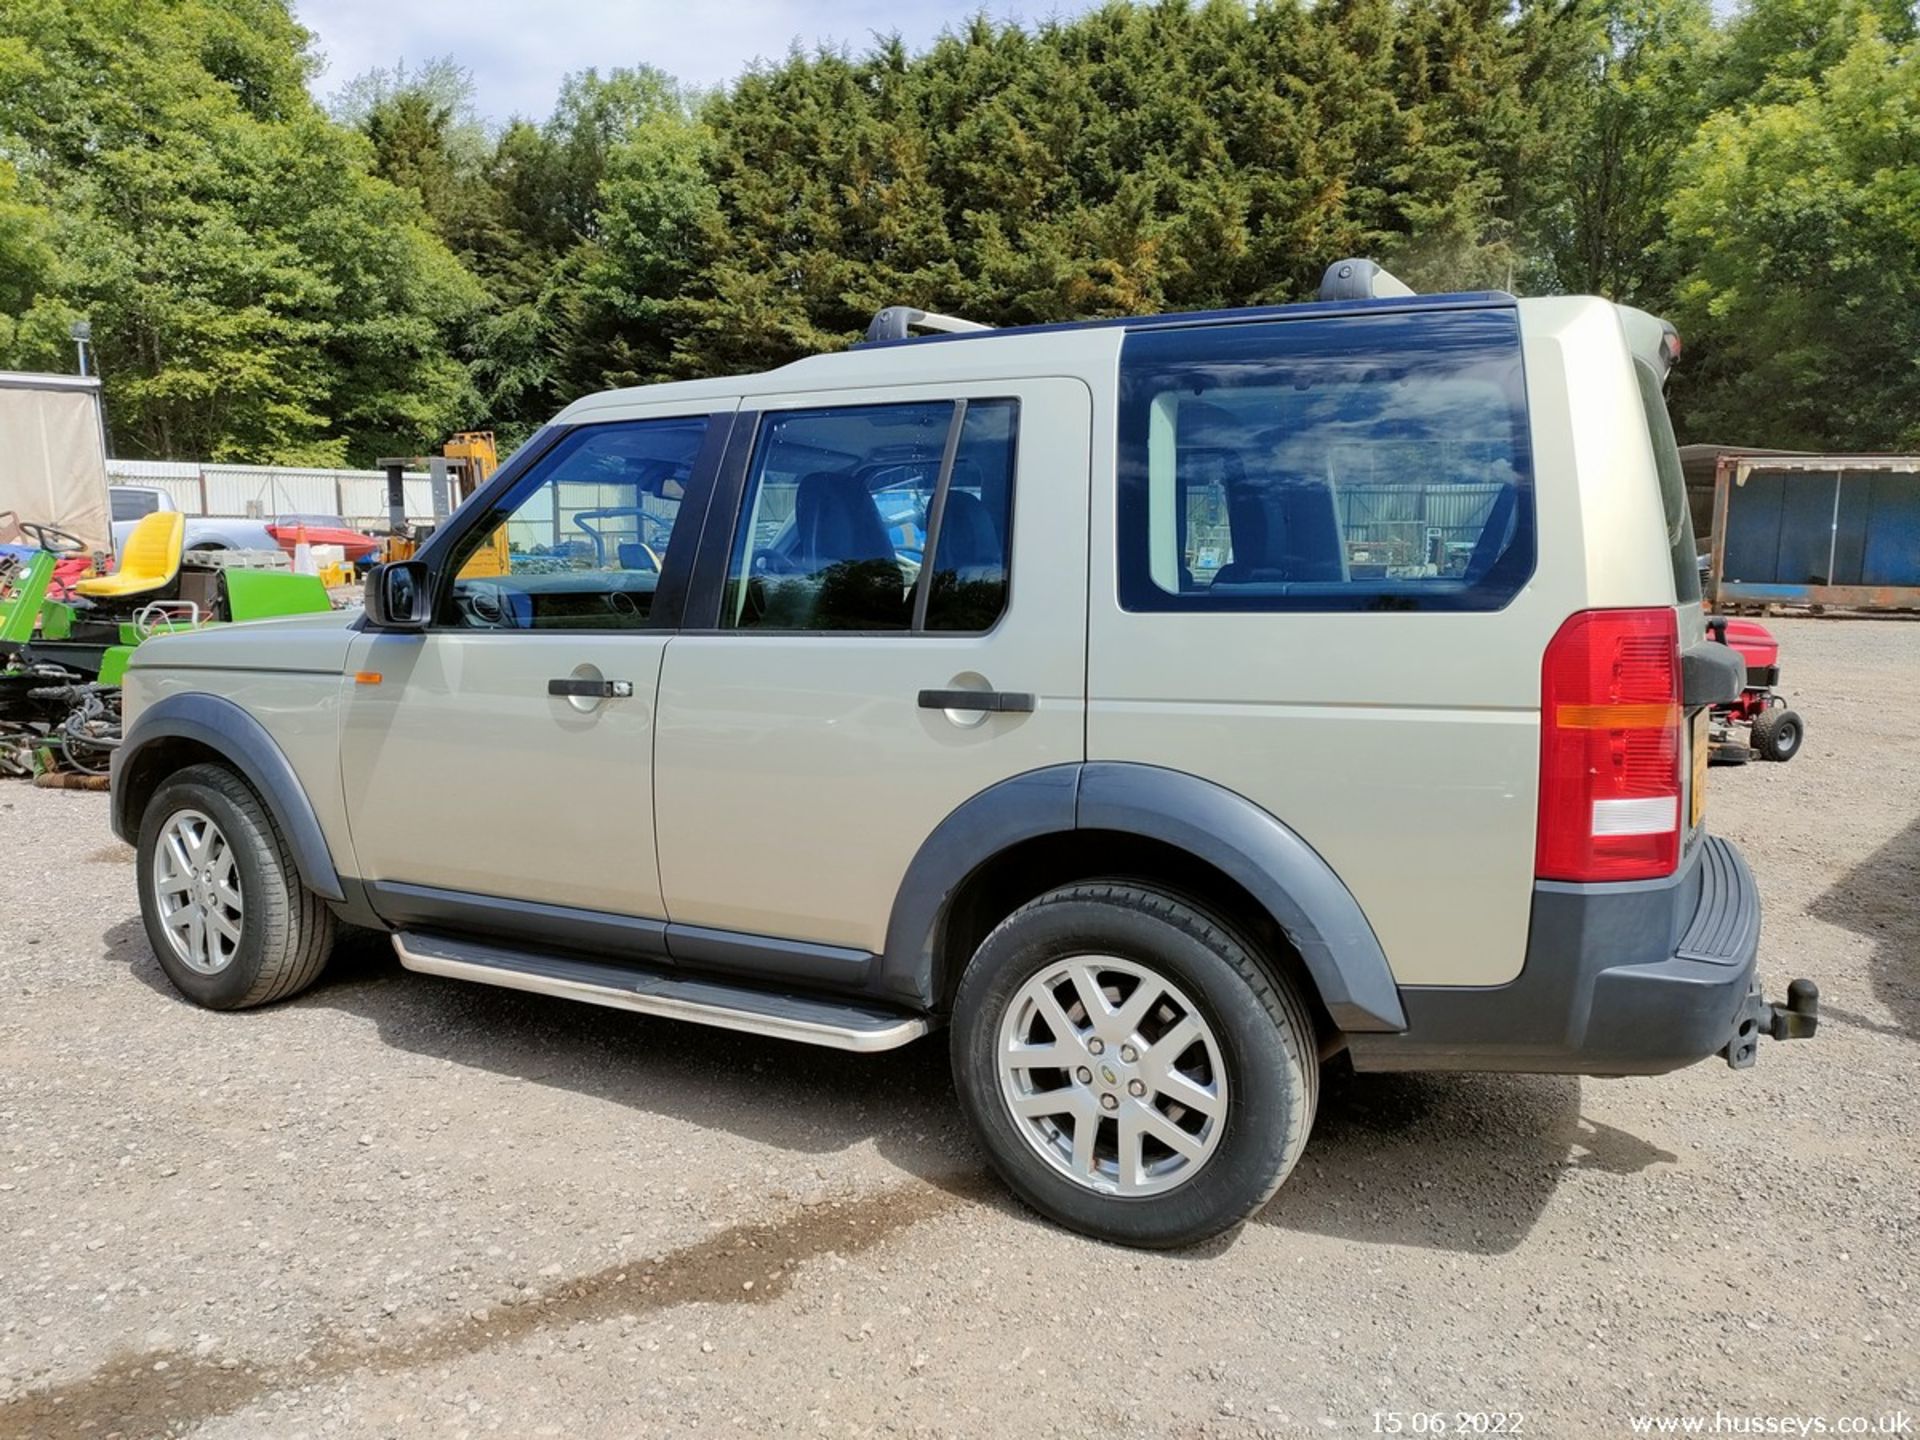 2007 LAND ROVER DISCOVERY - 2720cc 5dr Estate (Gold) - Image 13 of 25